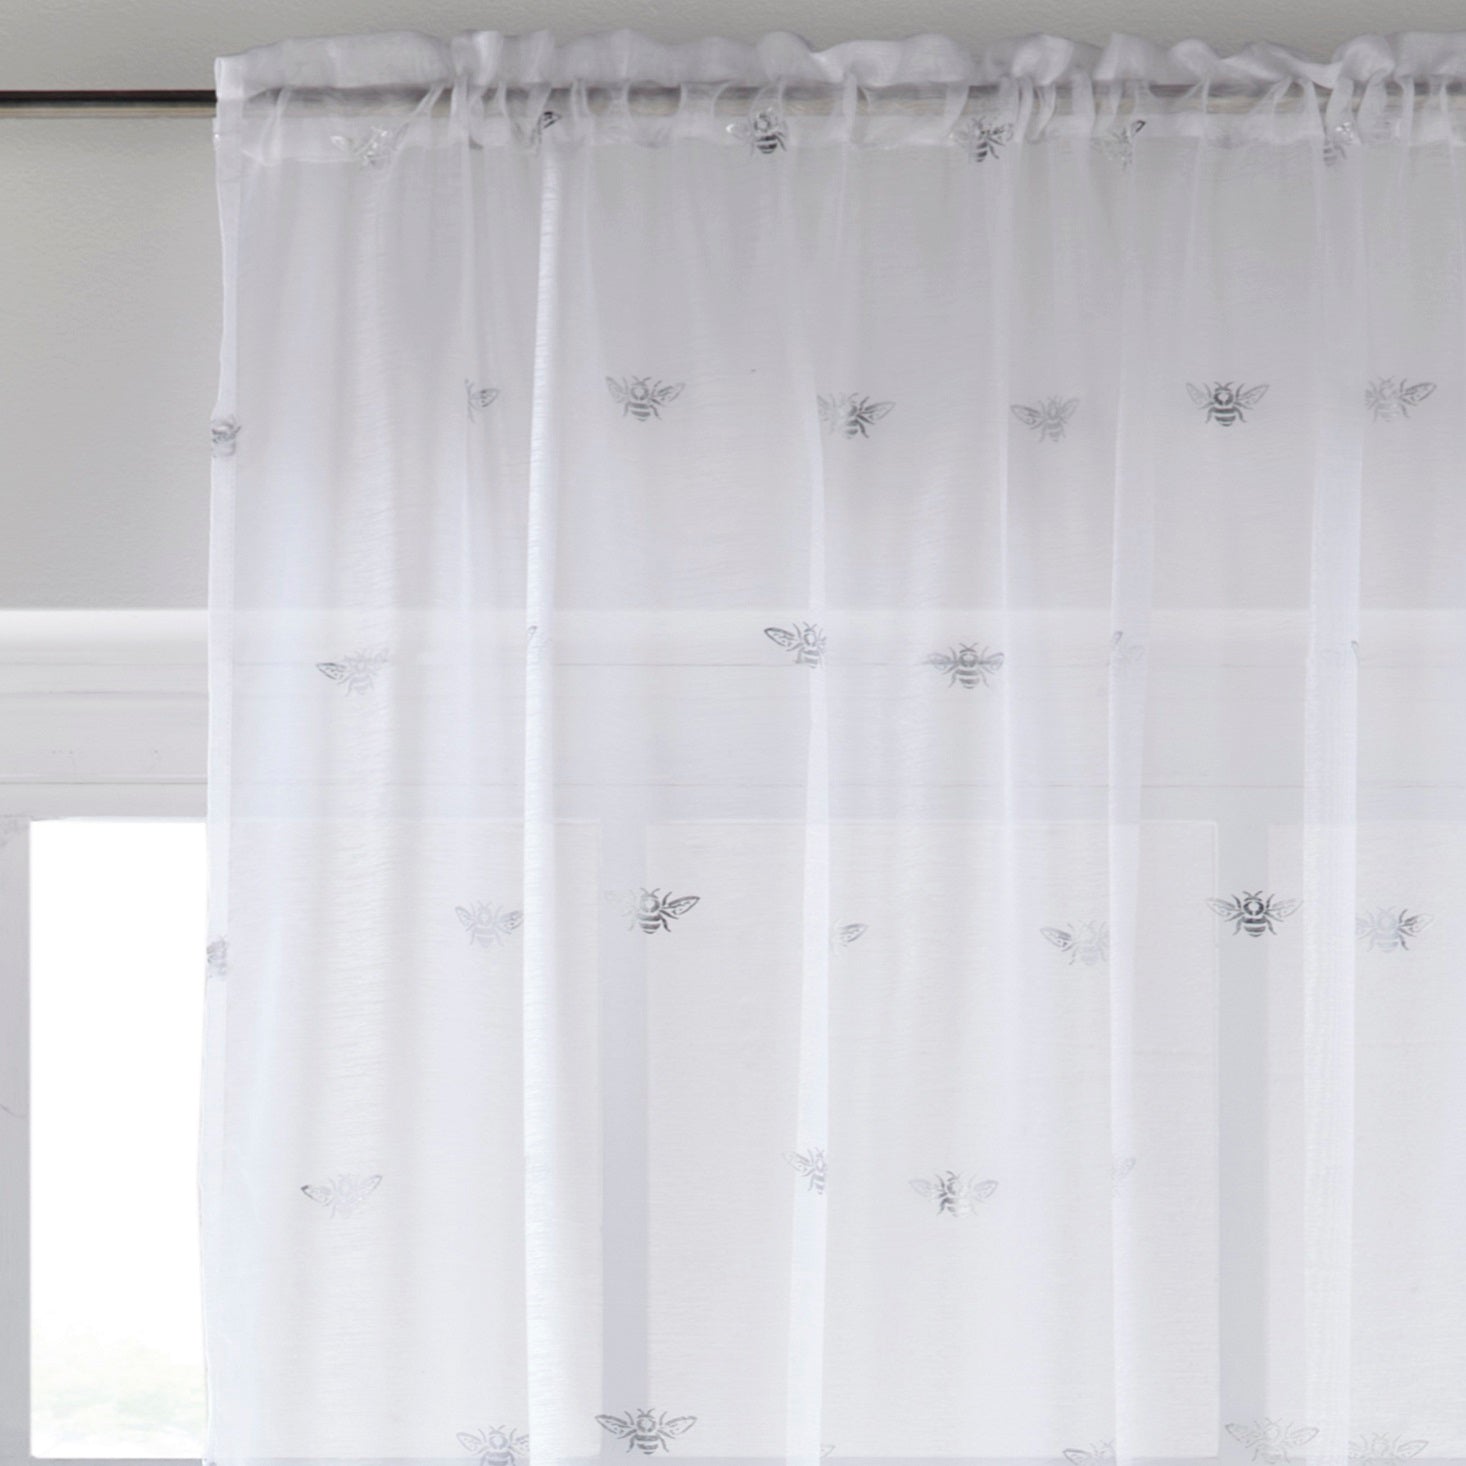 55x90" Sparkle Bees Voile Net Curtains Panel - White & Silver Grey